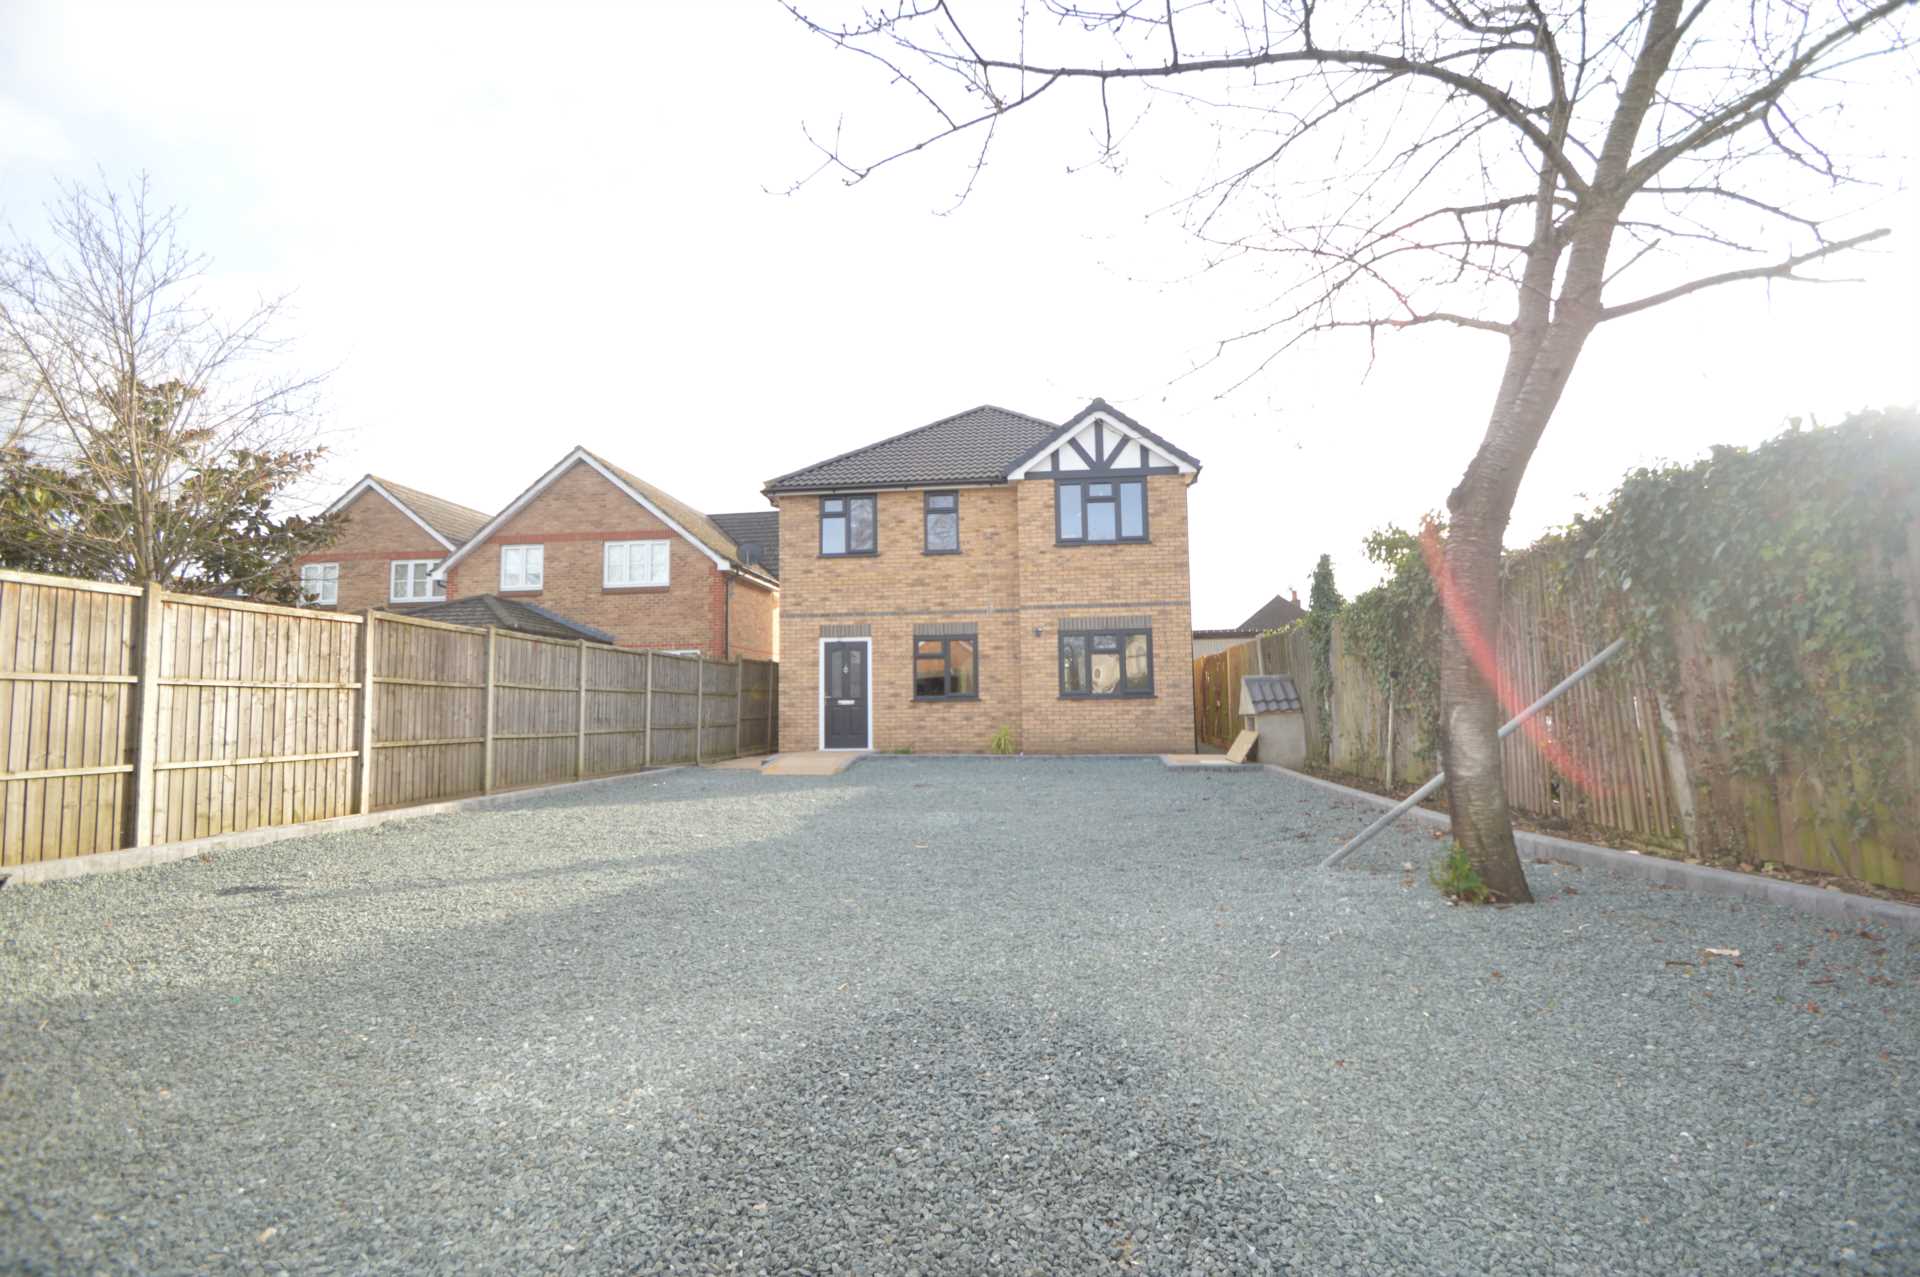 4 bed Detached House for rent in Addlestone. From Premier Lettings